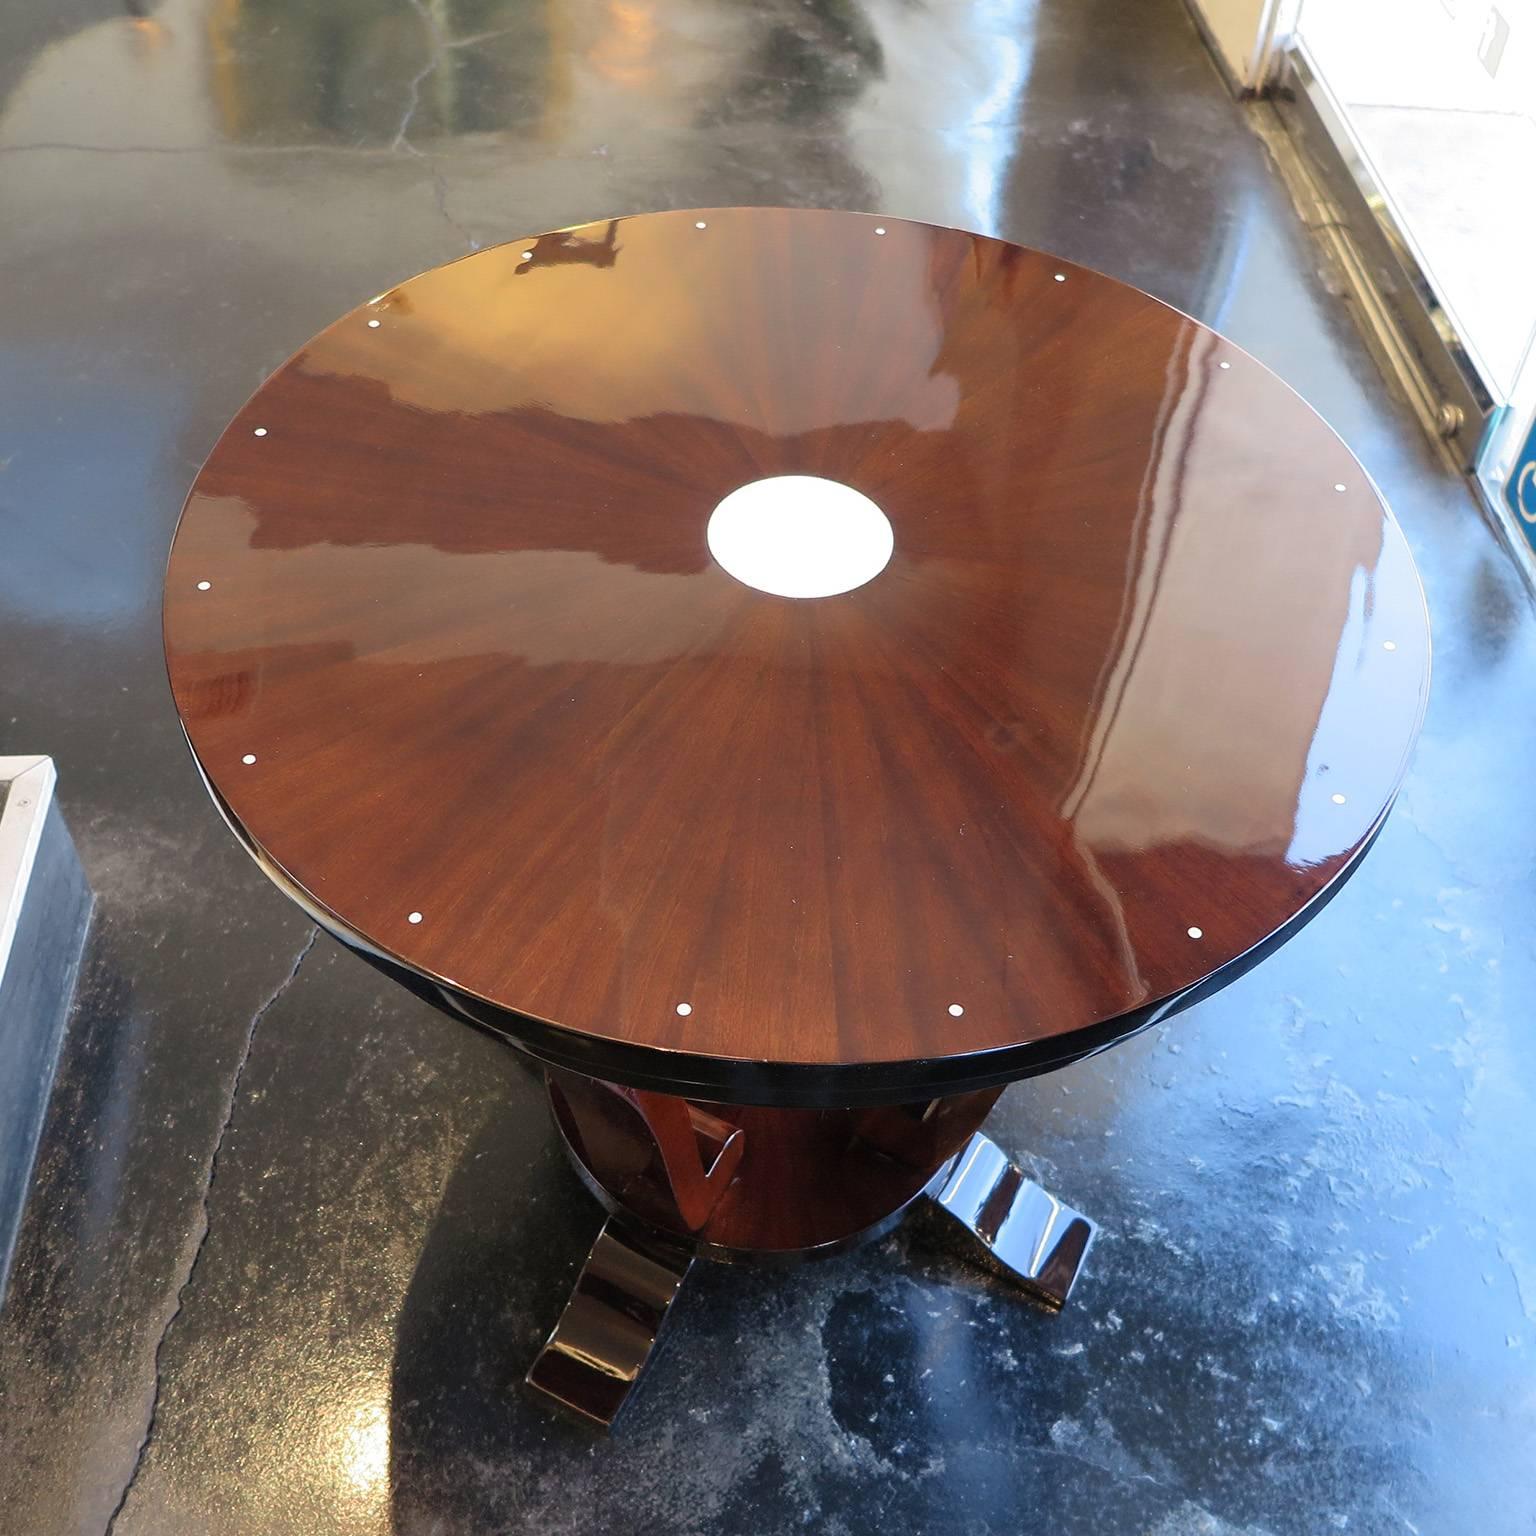 French Art Deco round side table circa 1930's with lacquered mahogany in starburst design.  Espresso lacquer detailing and round ivory lacquer inlay on top.  